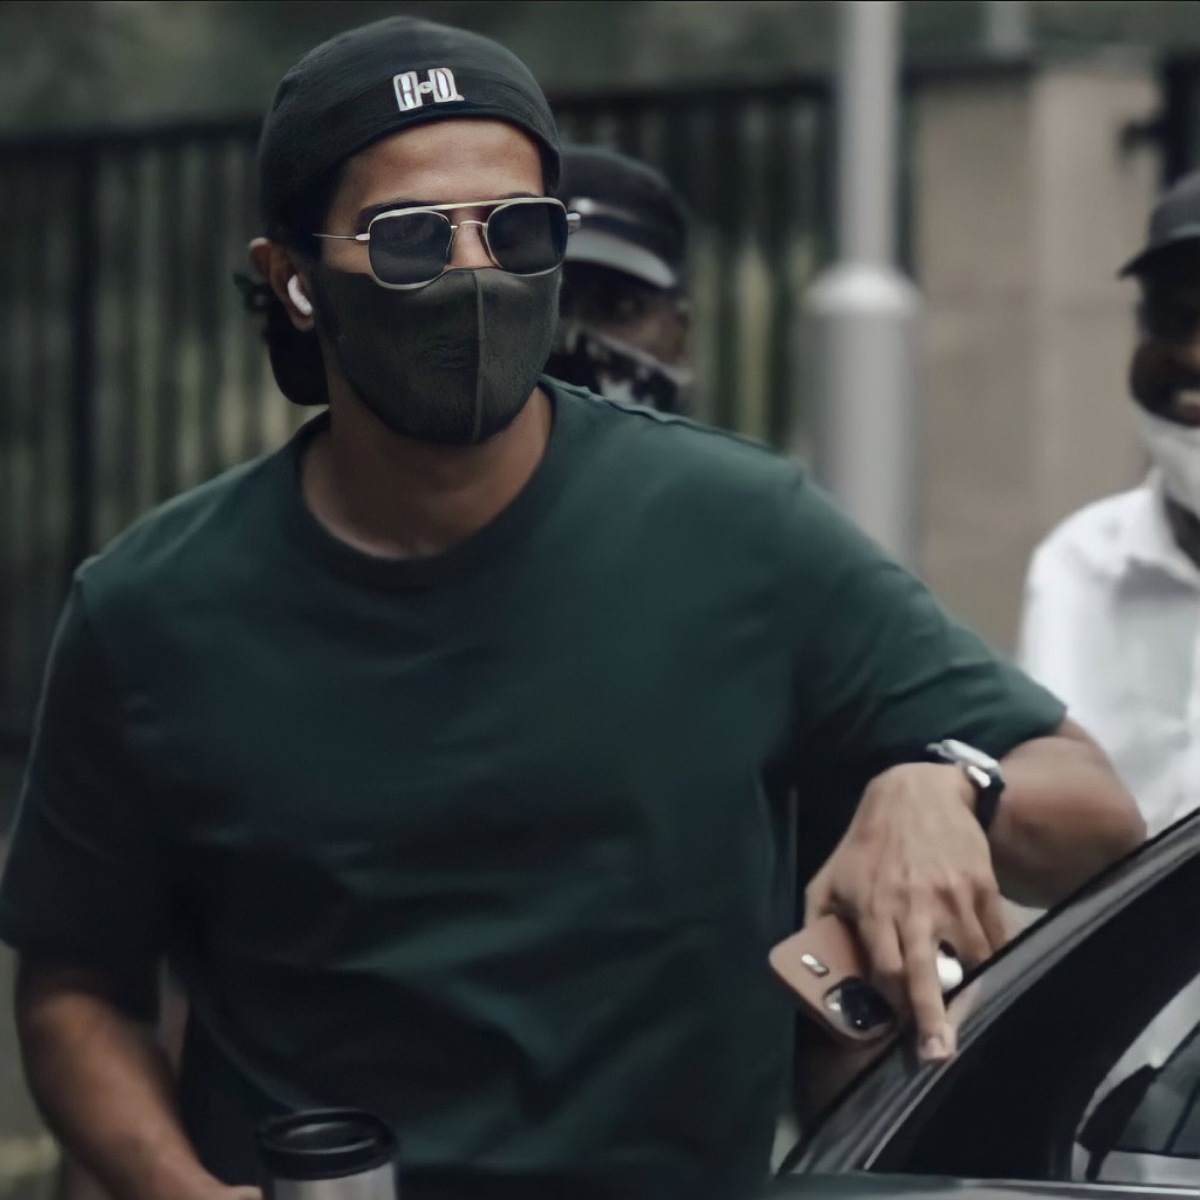 Dulquer Salmaan wins hearts with his swag & stylish new look from his swanky car; Watch Video